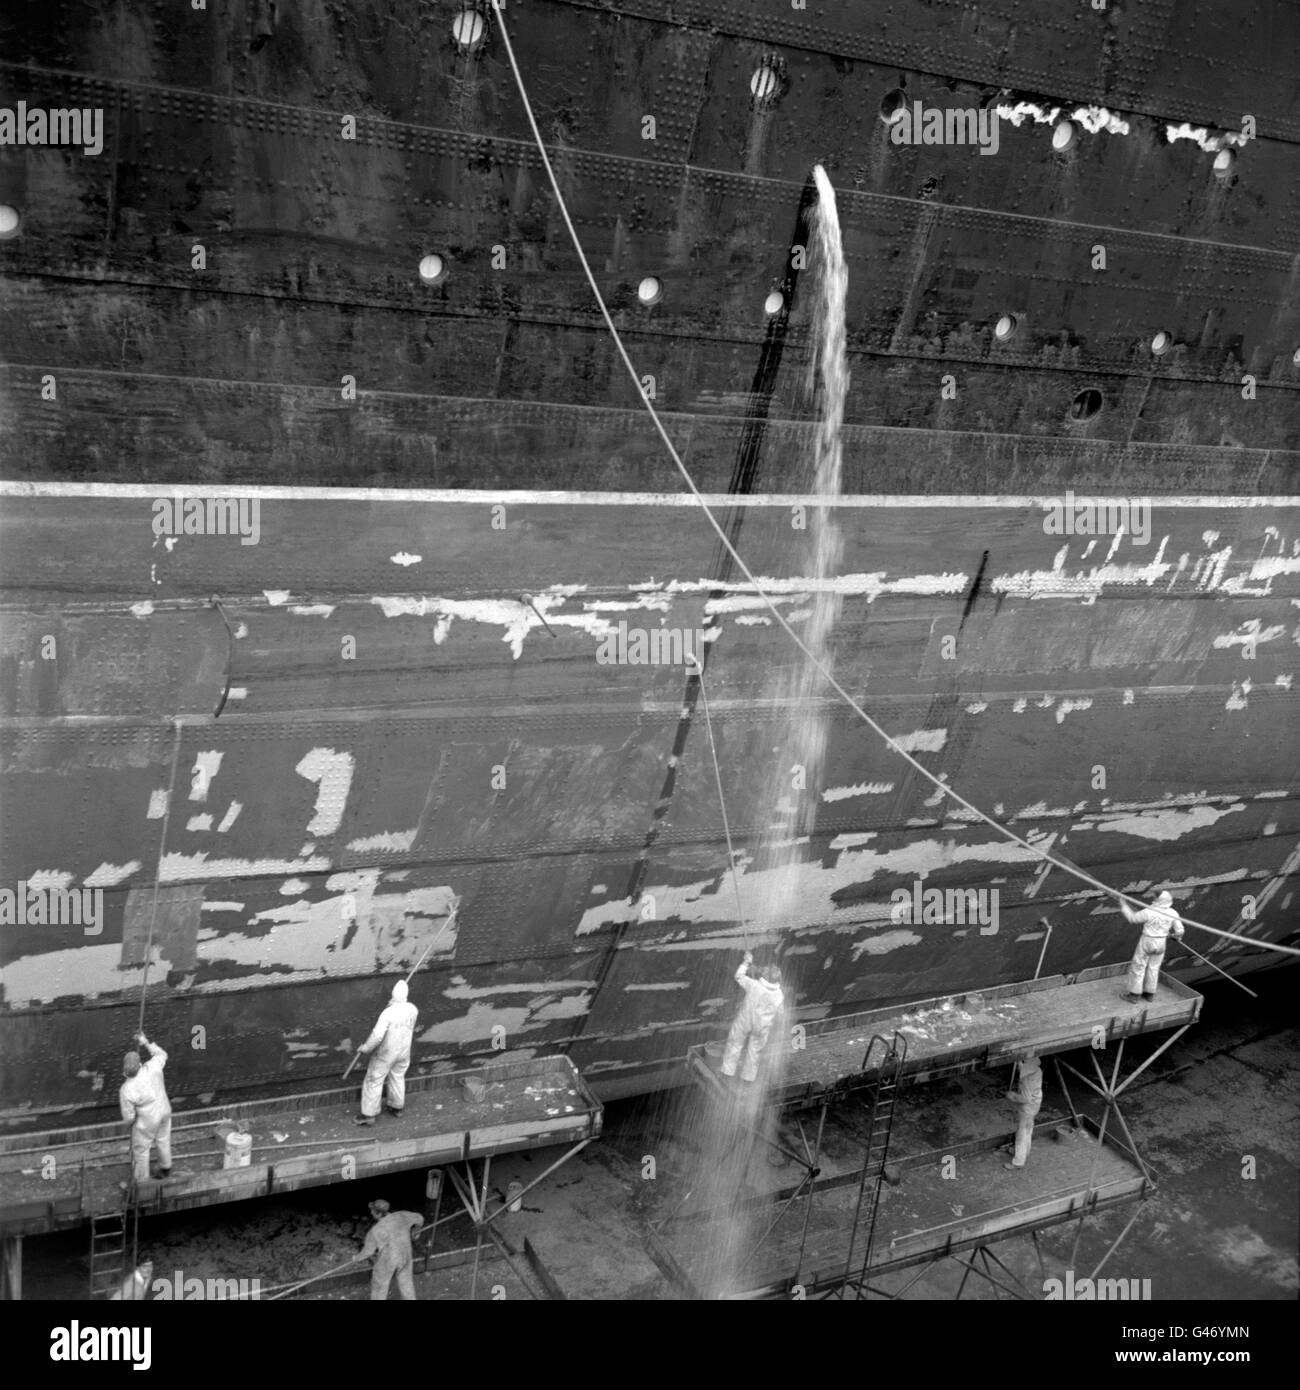 A deluge of water cascades on to a workman, who was working on the hull of the liner 'RMS Queen Elizabeth' in the King George V Dry Dock at Southampton. Stock Photo